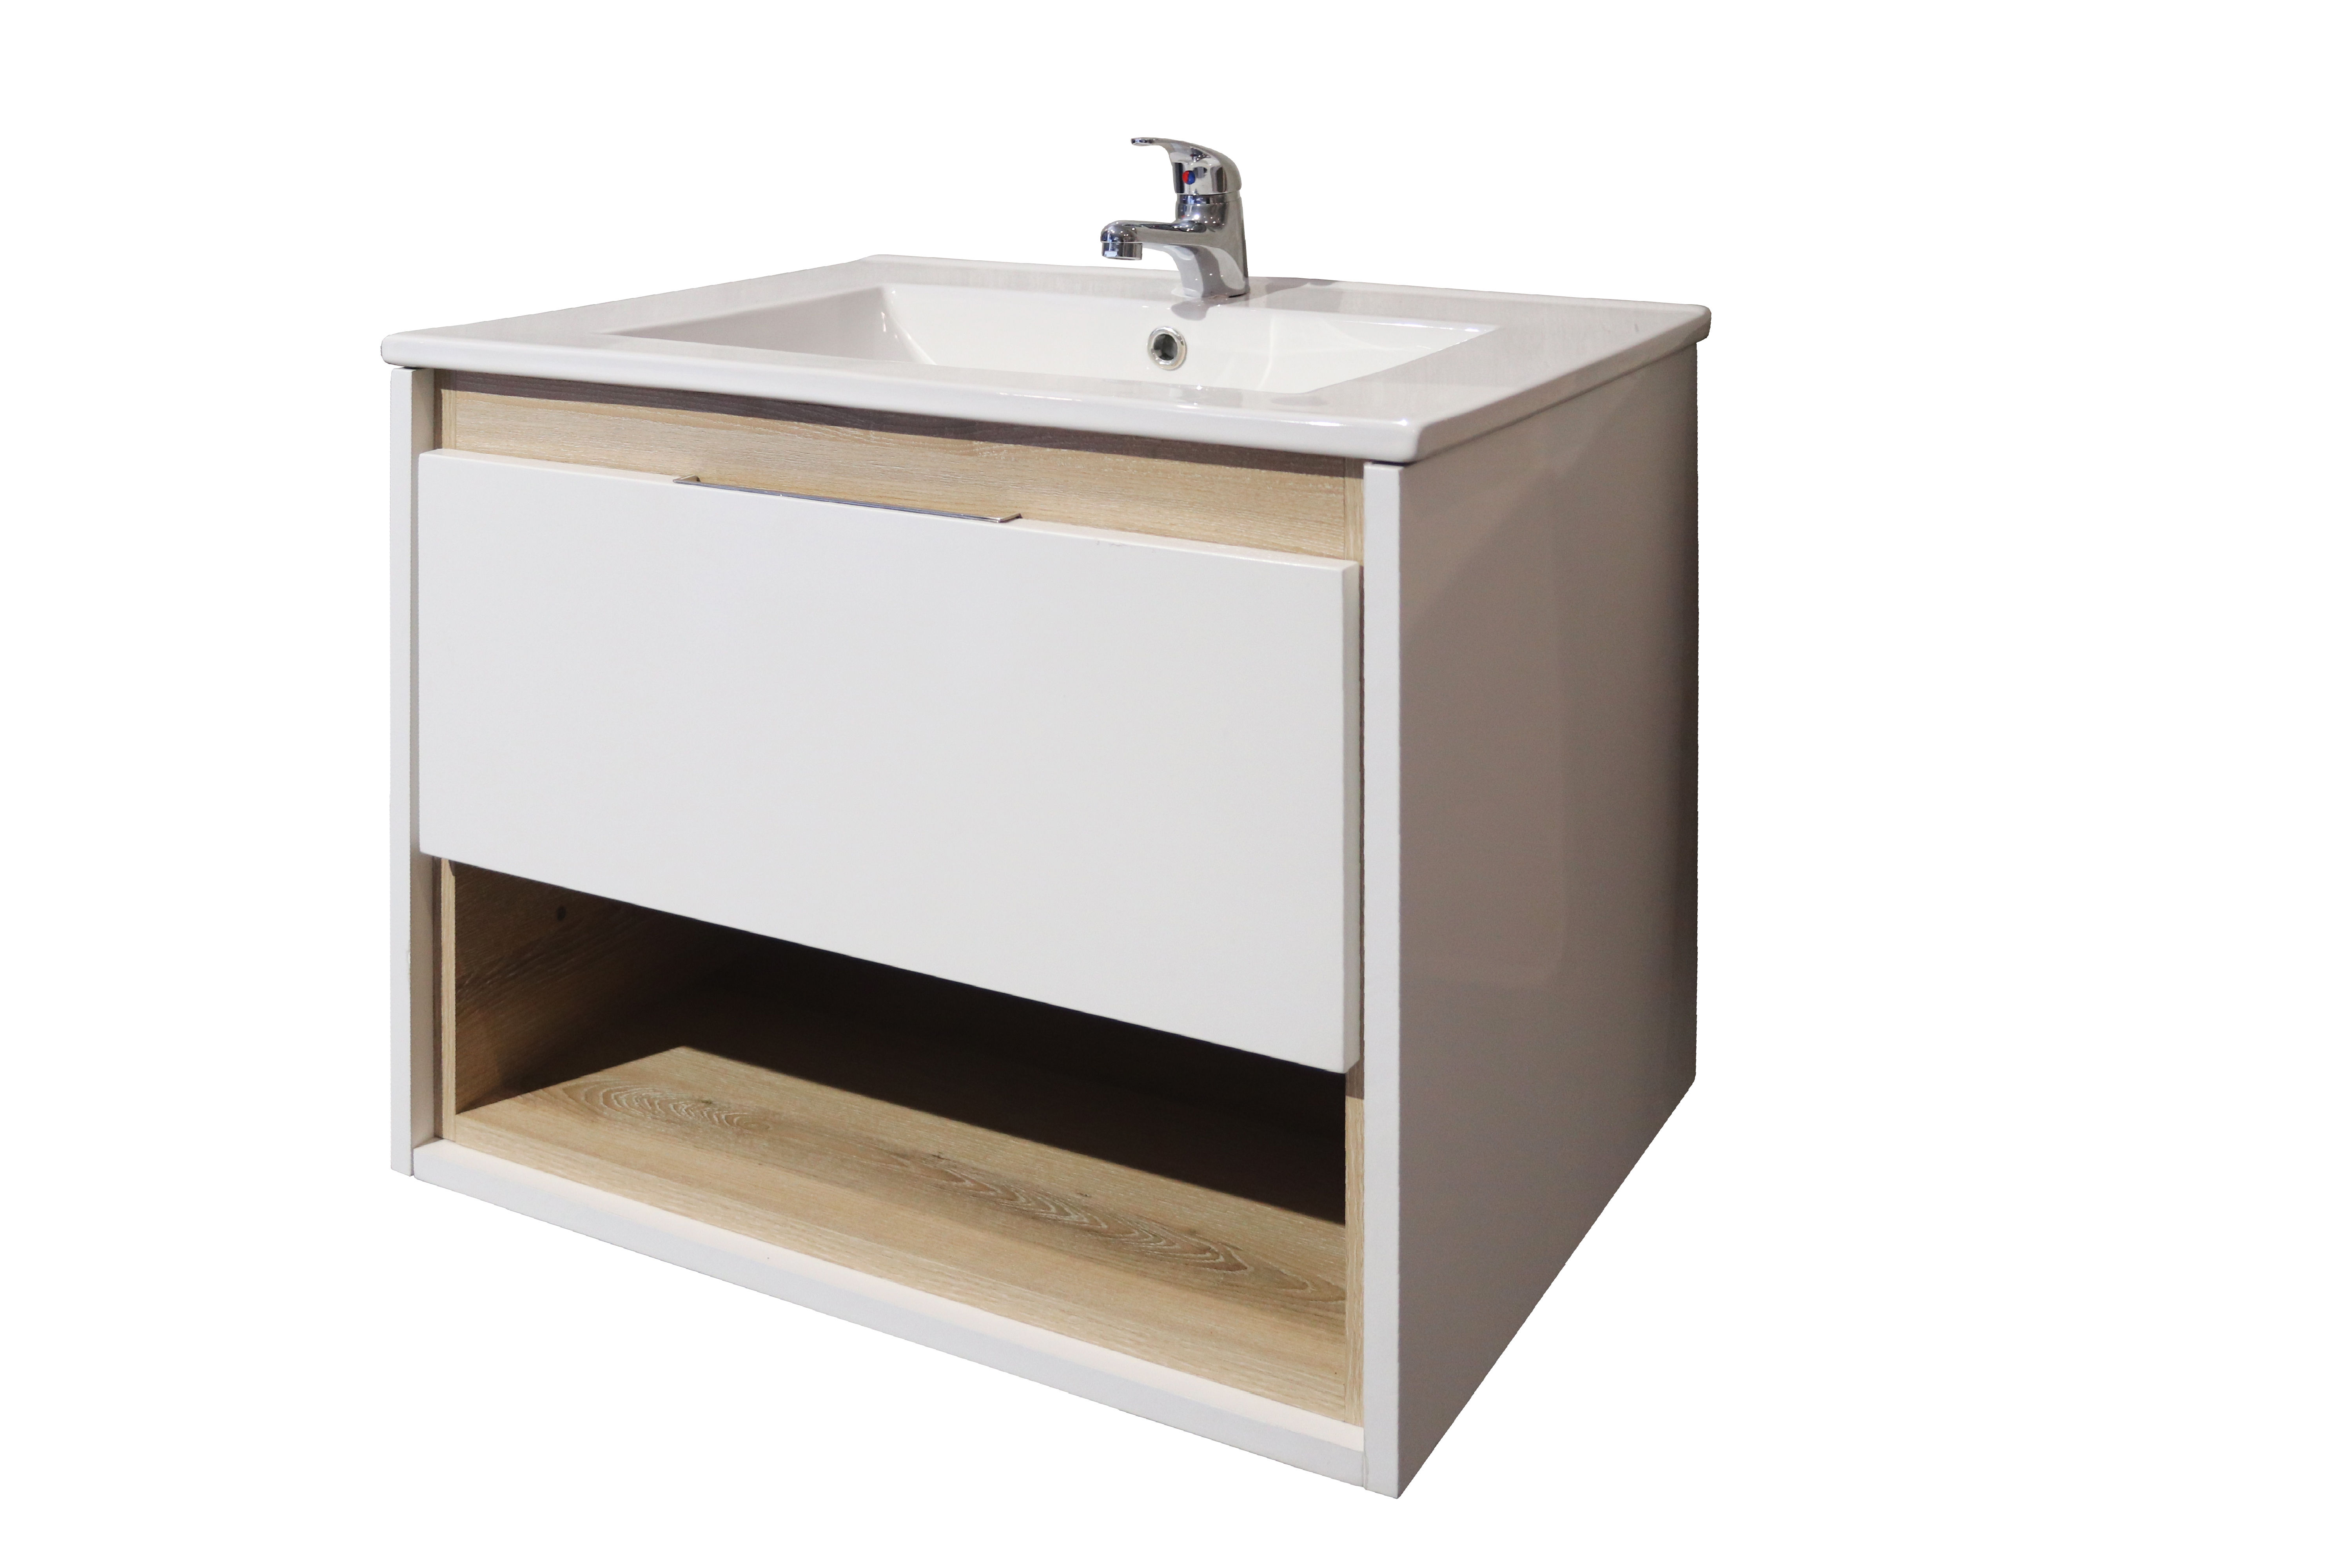 Celeste Floating Bathroom Vanity in white with washed shale accent